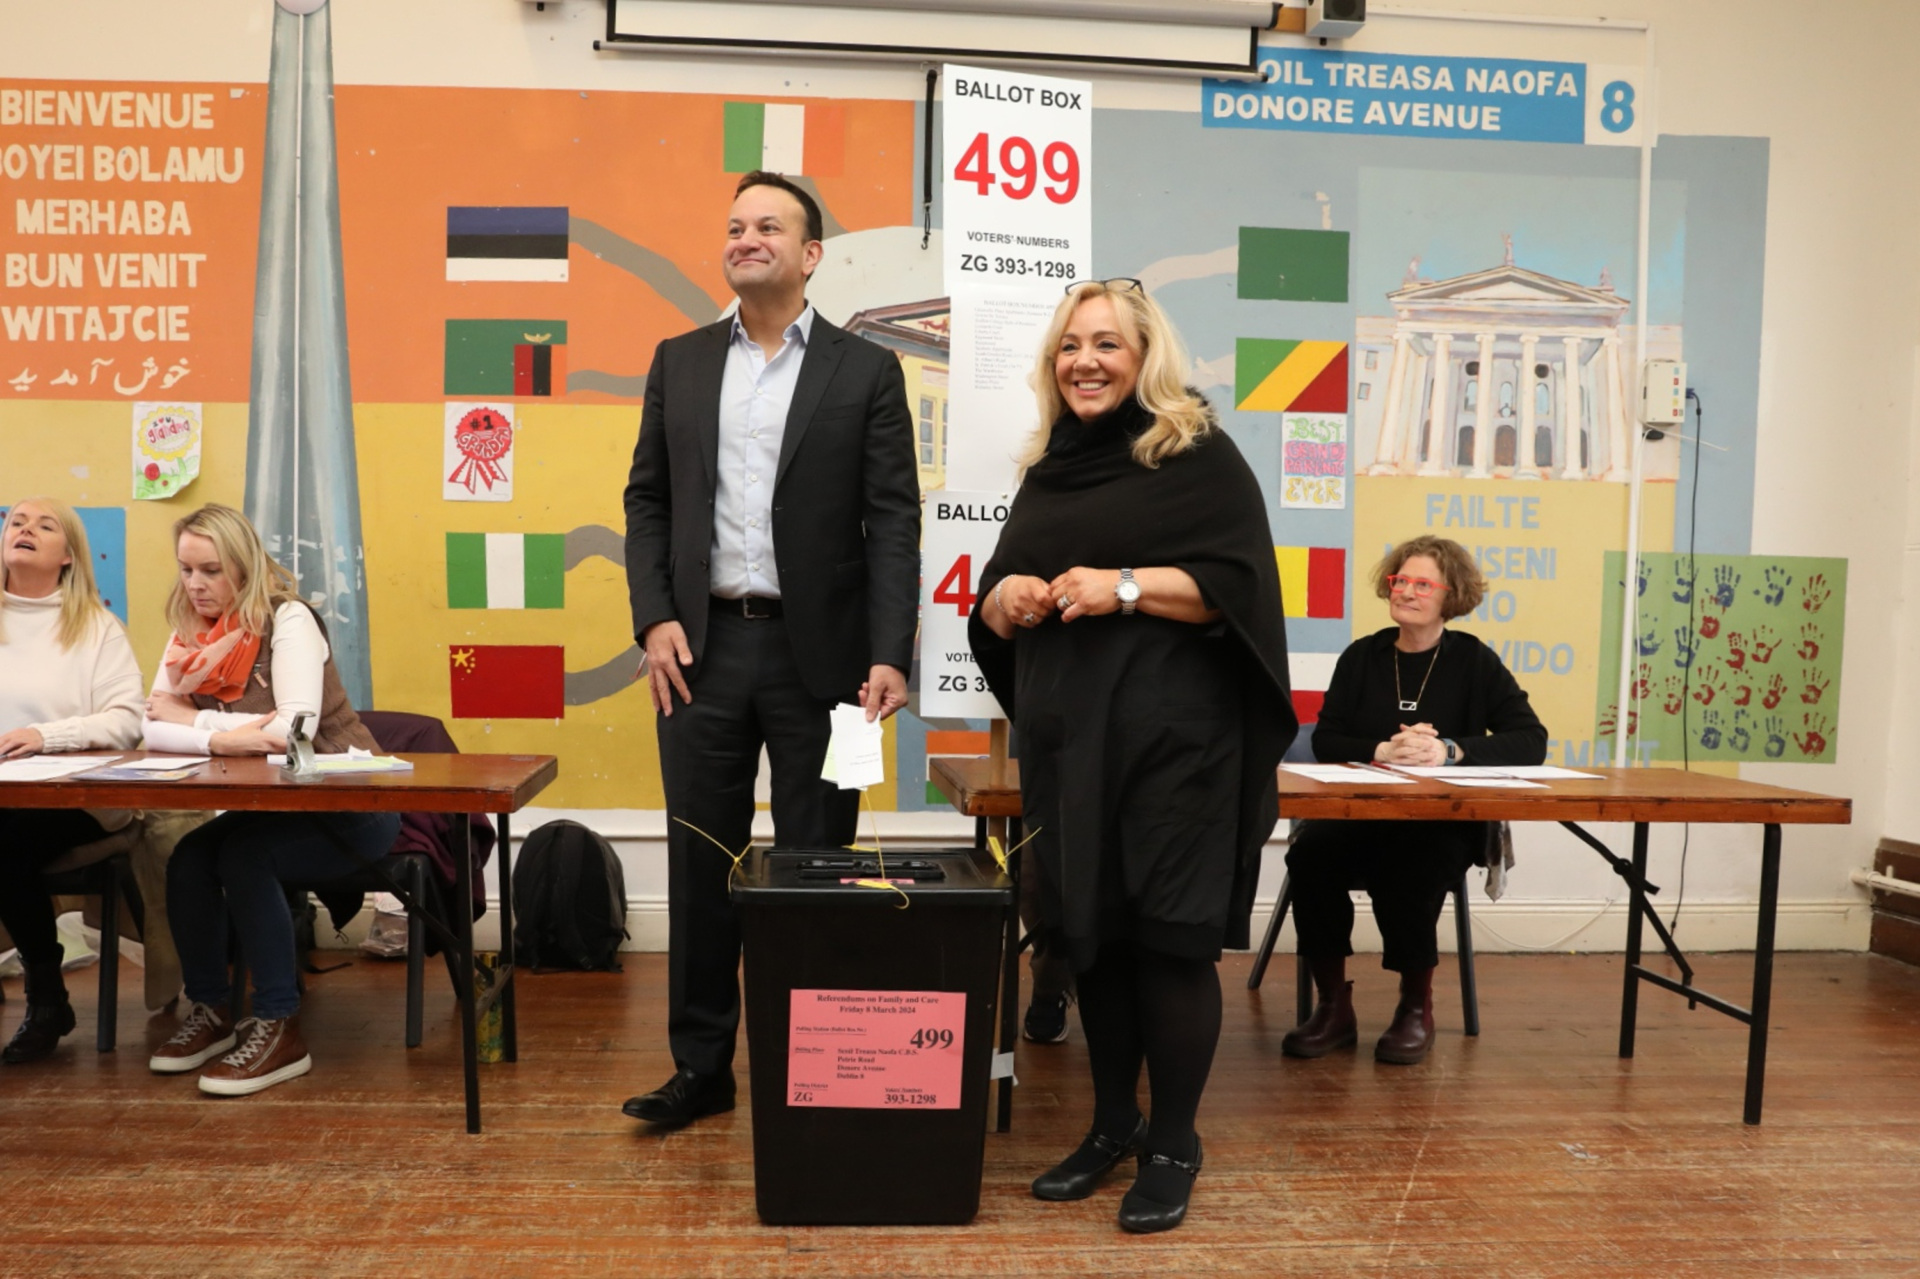 Taoiseach Leo Varadkar and Fine Gael senator Mary Seery Kearney, at the polling located in Scoil Treasa Naofa, on Donore Avenue, Dublin, as Ireland holds referenda on the proposed changes to the wording of the Constitution relating to the areas of family and care. The family amendment proposes extending the meaning of family beyond one defined by marriage and to include those based on 